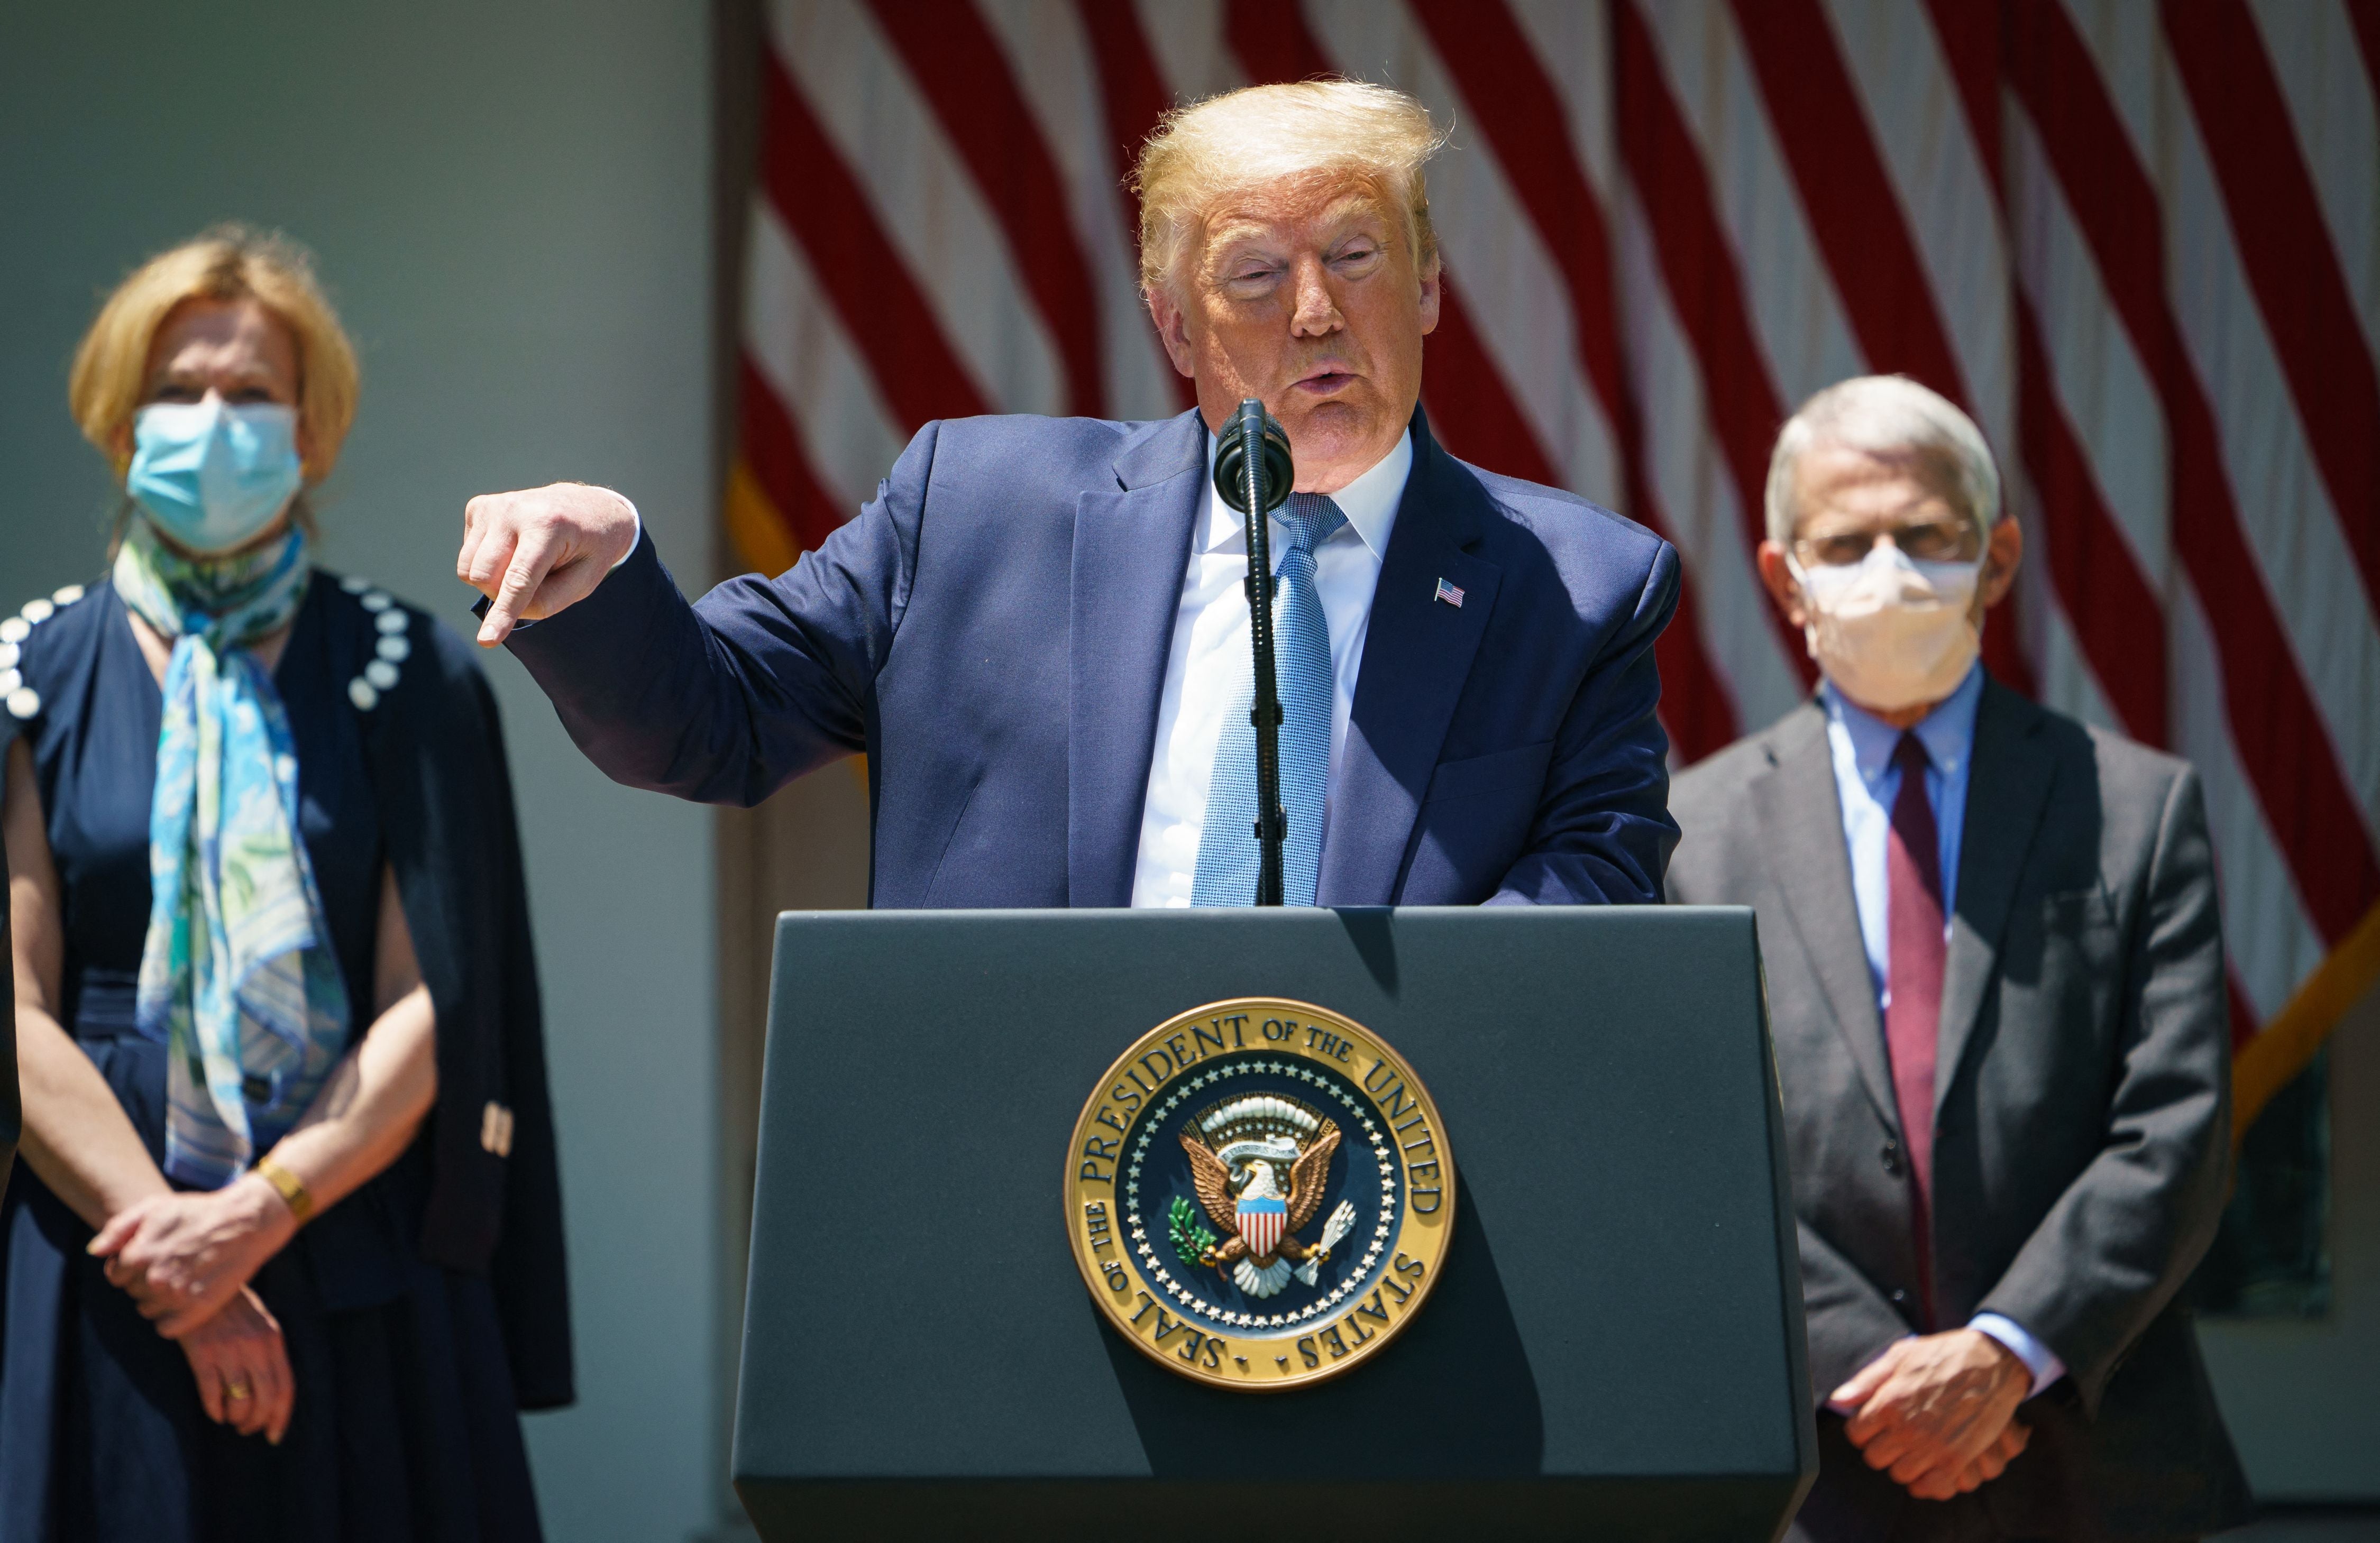 US President Donald Trump speaks on vaccine development in the Rose Garden of the White House in Washington, DC, flanked by White House Coronavirus Task Force Deborah Birx and Director of the National Institute of Allergy and Infectious Diseases Anthony Fauci